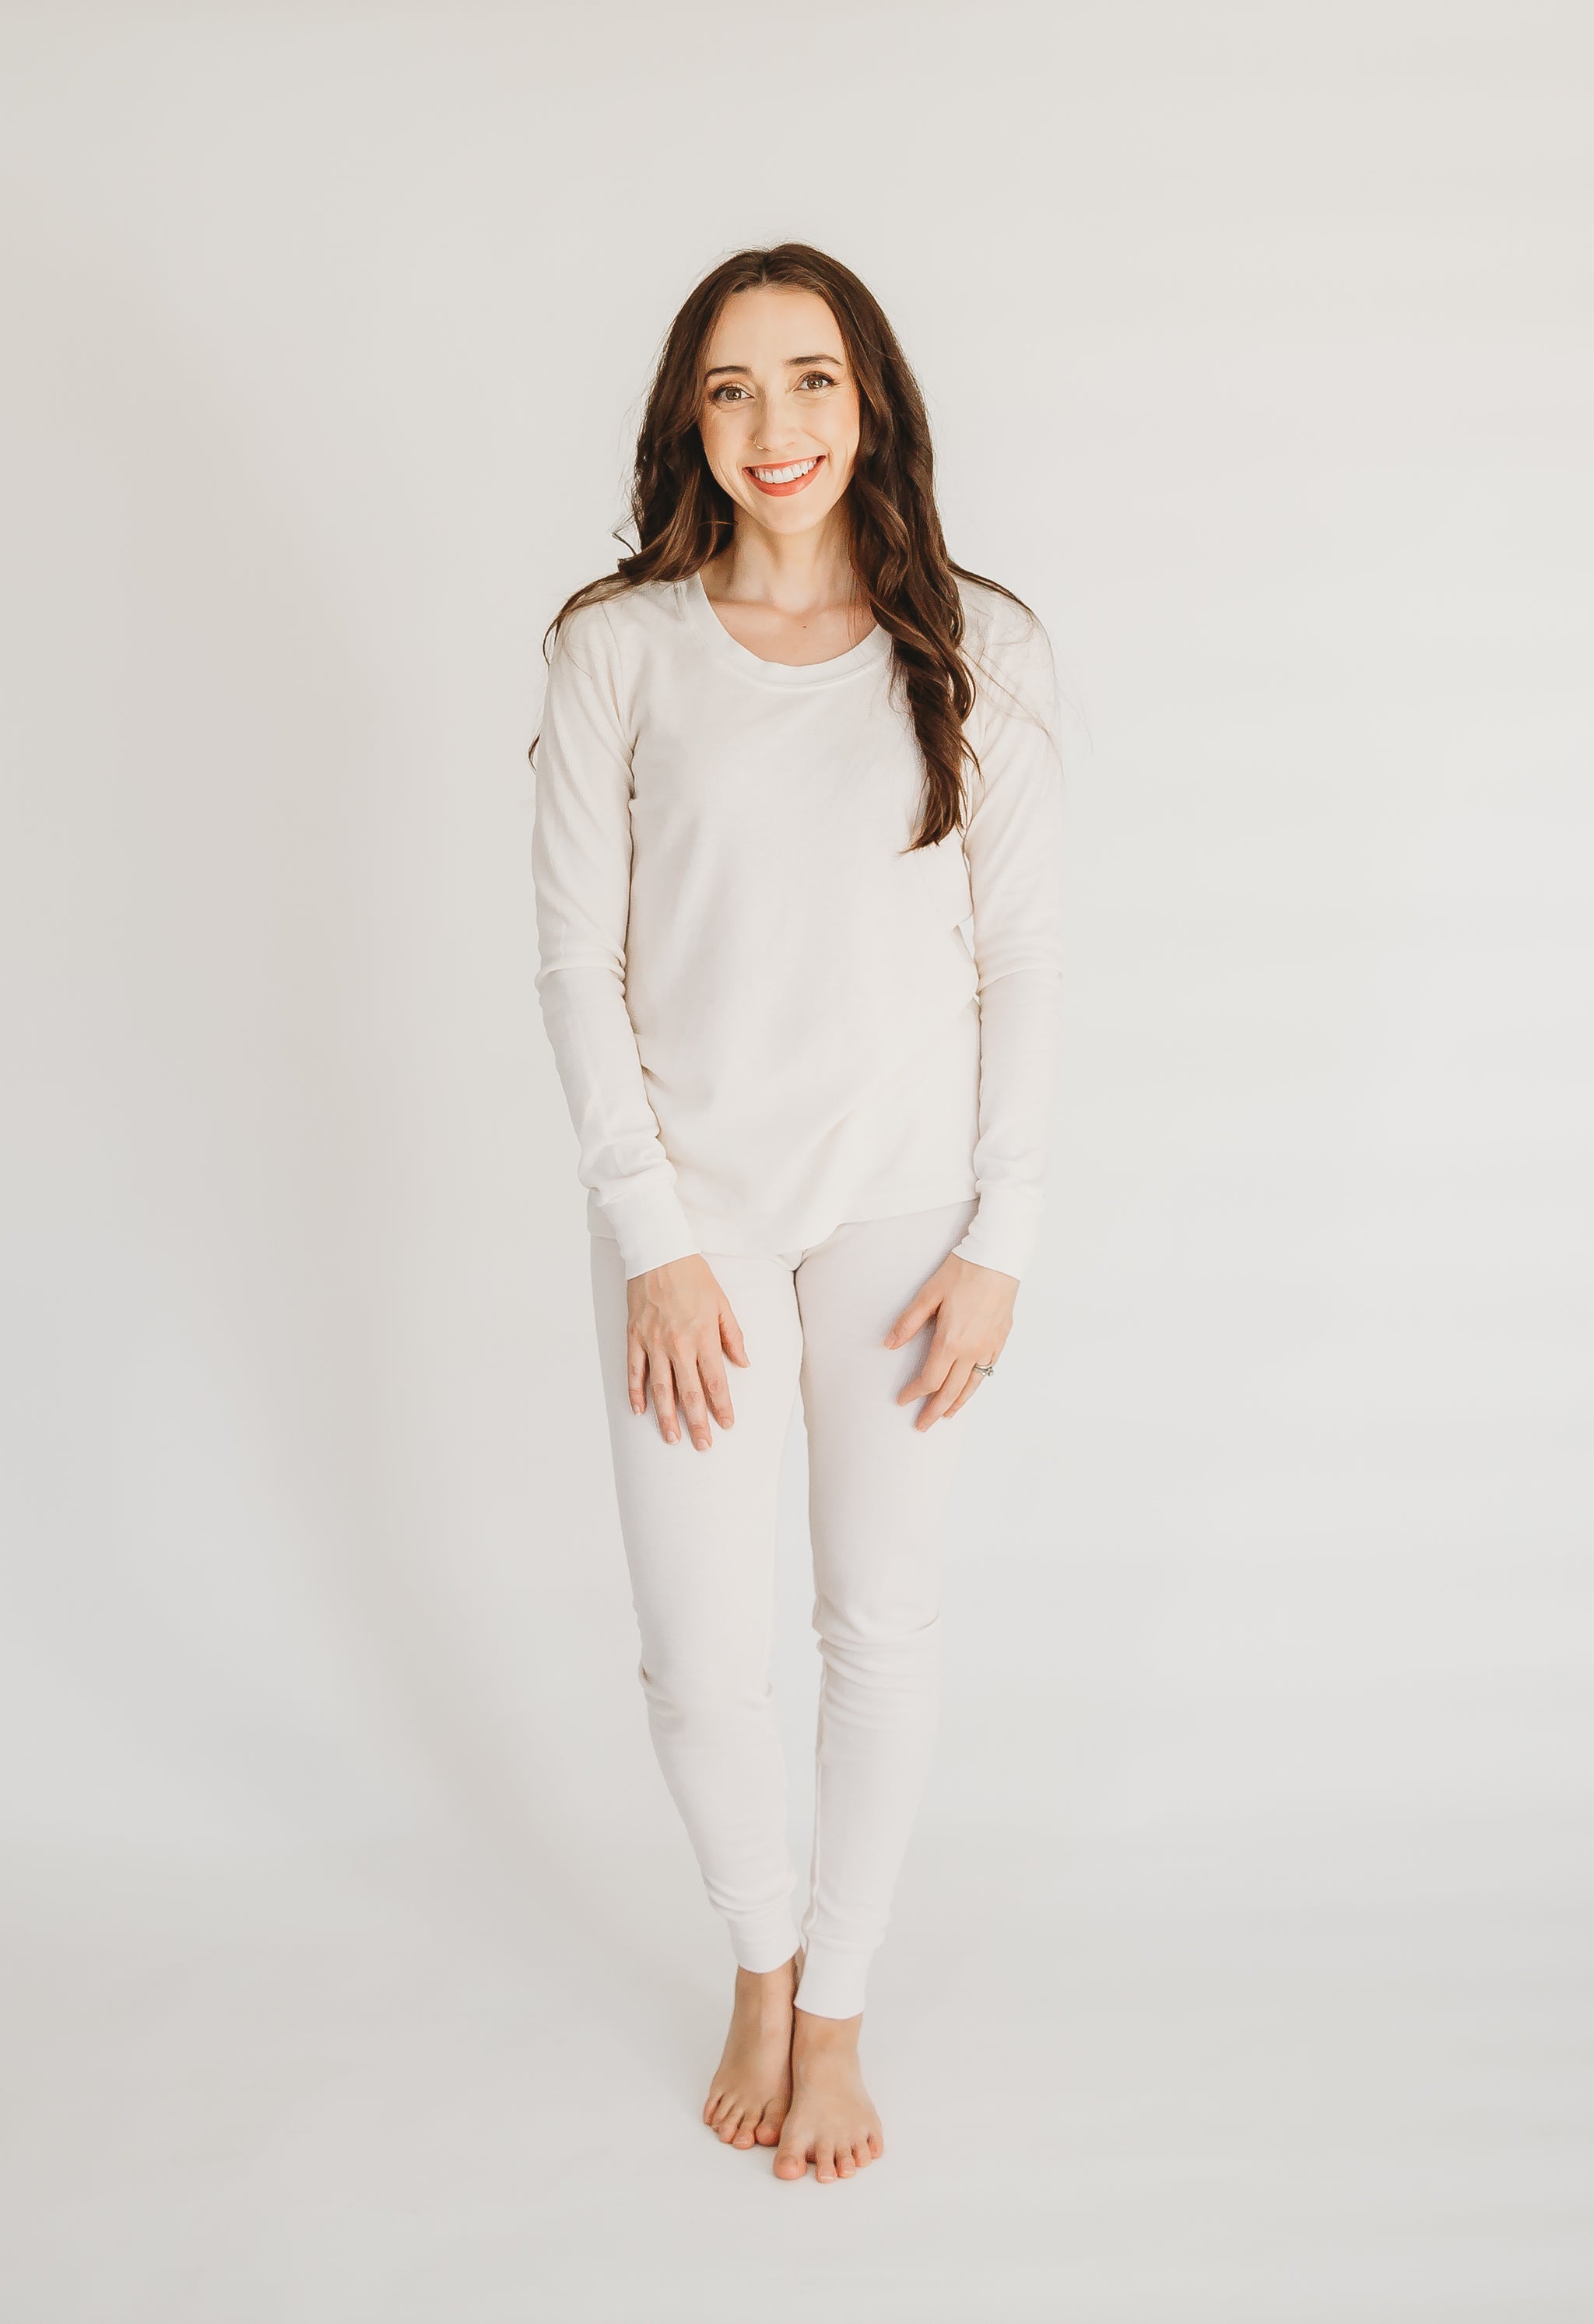 Buy Bodycare Off White Solid Women Thermal Top Online at Low